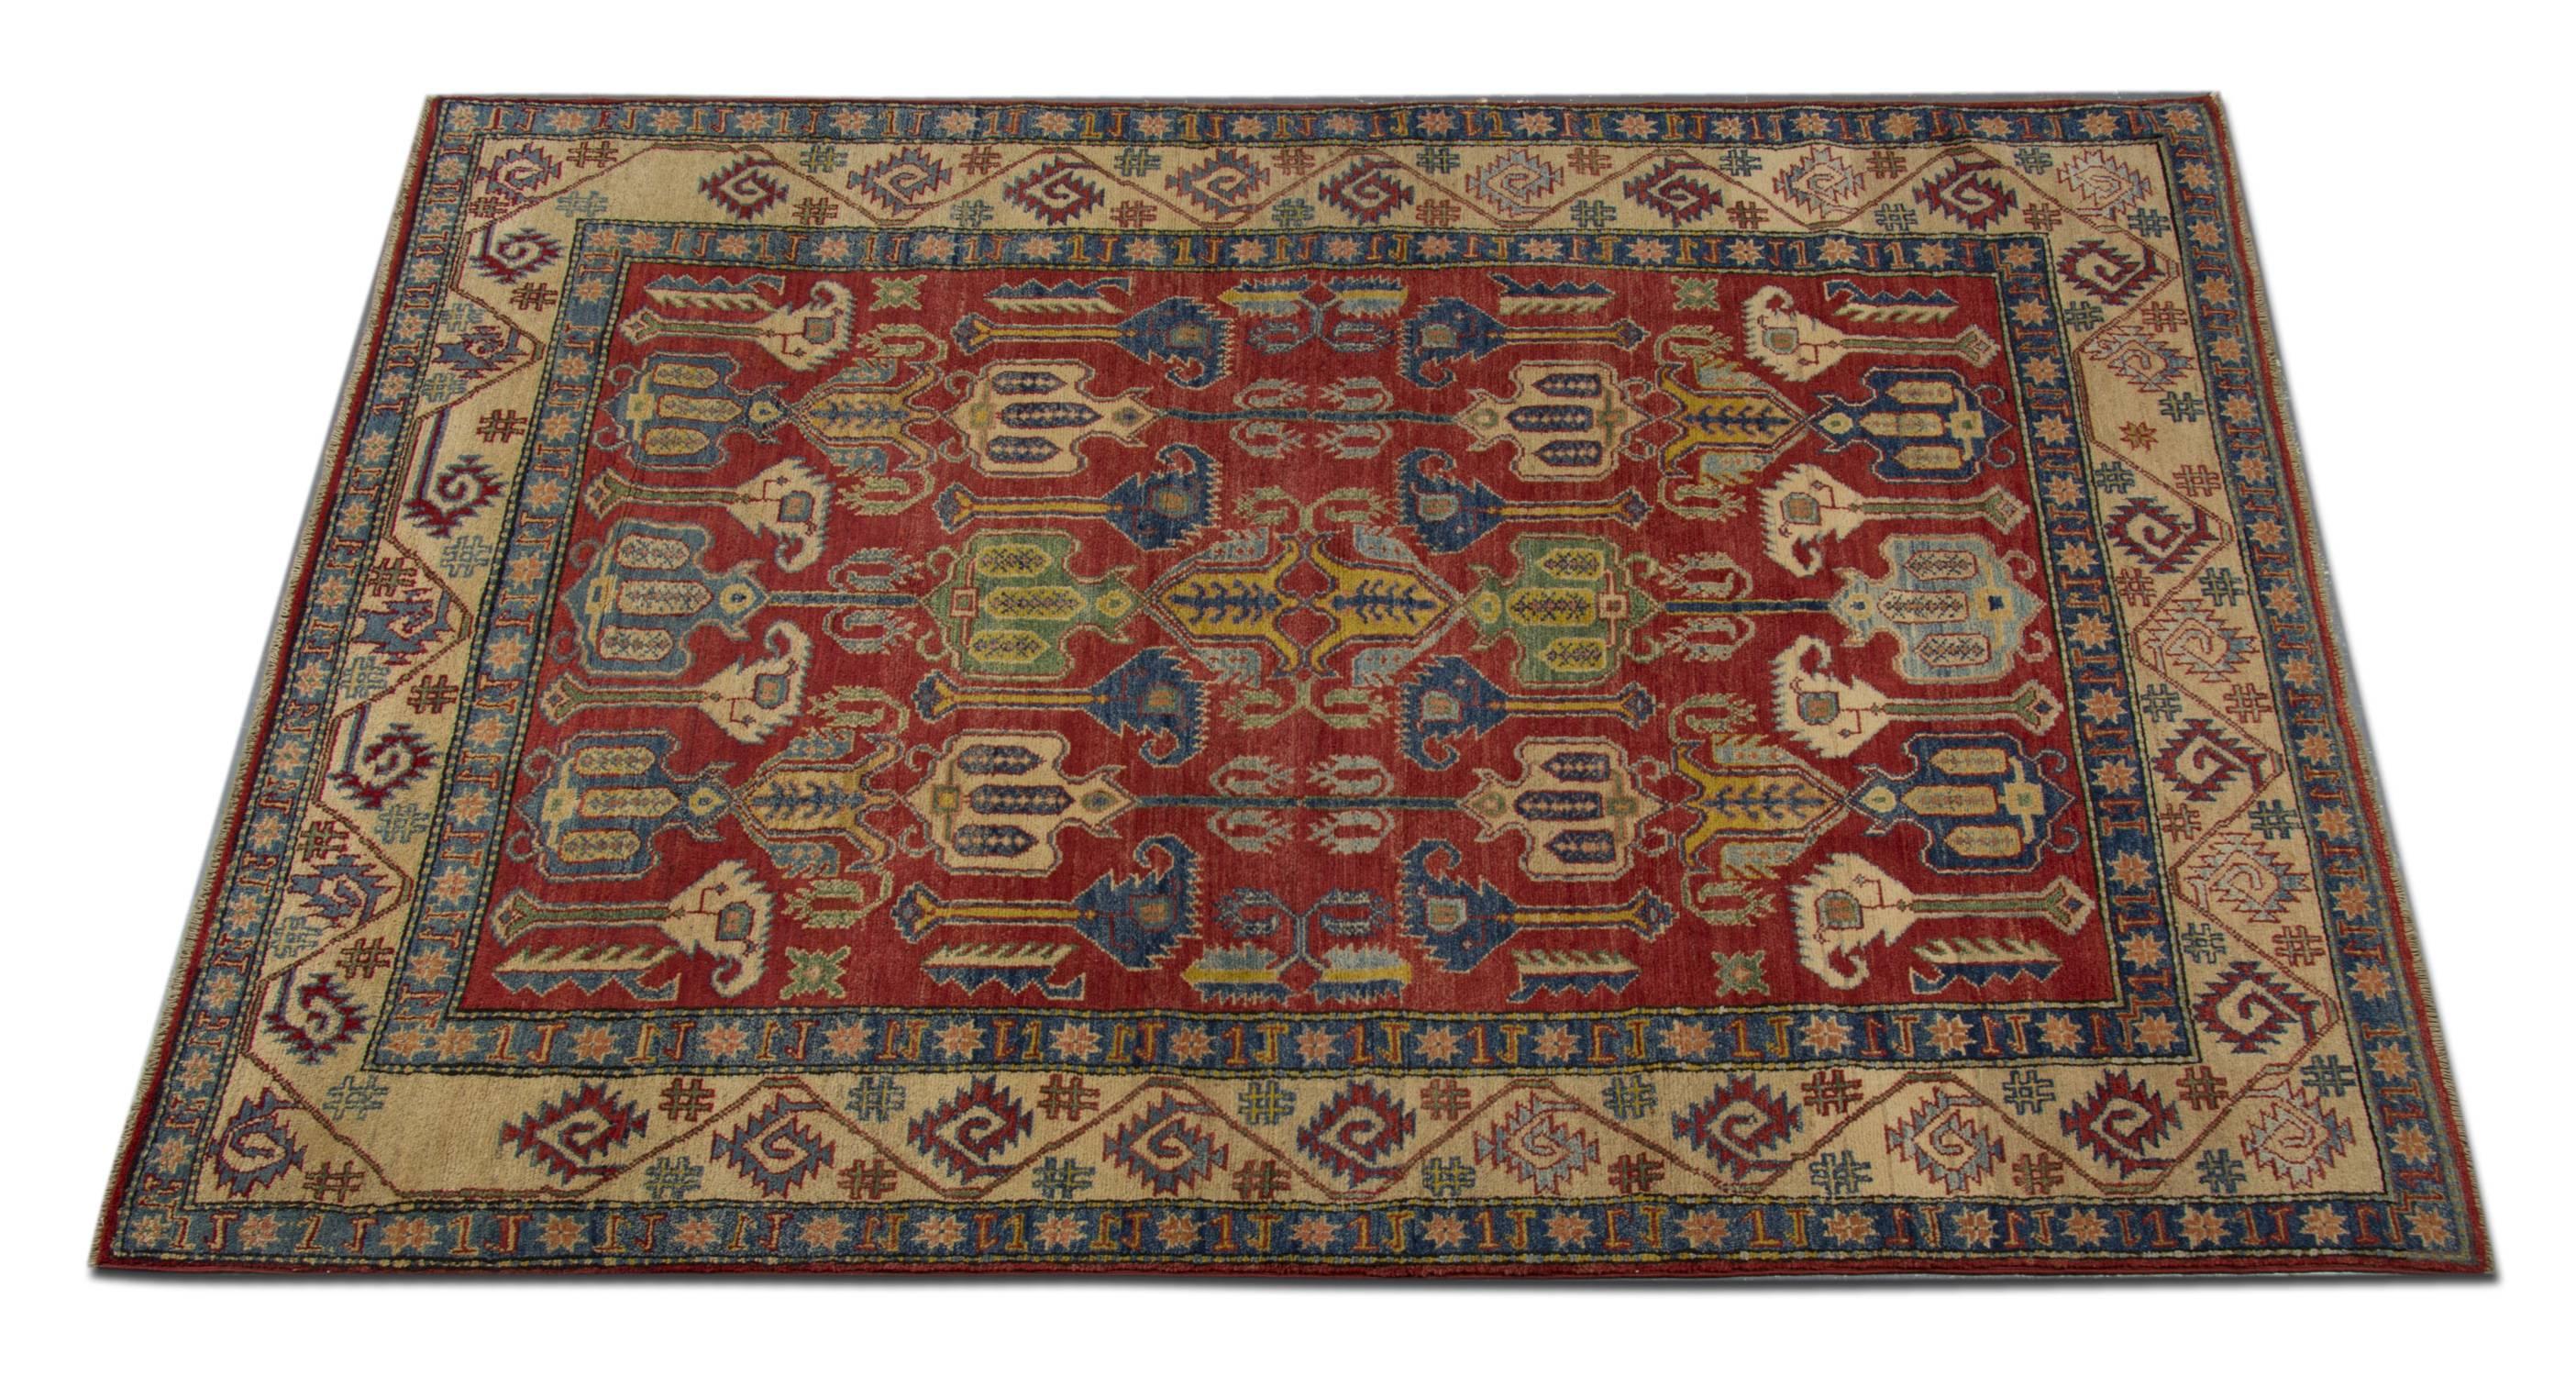 This is an example of a handwoven rug, which is featuring designs from the Kazak region. The Afghan weavers used top quality wool and cotton for the production of this red rug. This tribal rug features typical geometric rug patterns. There are a